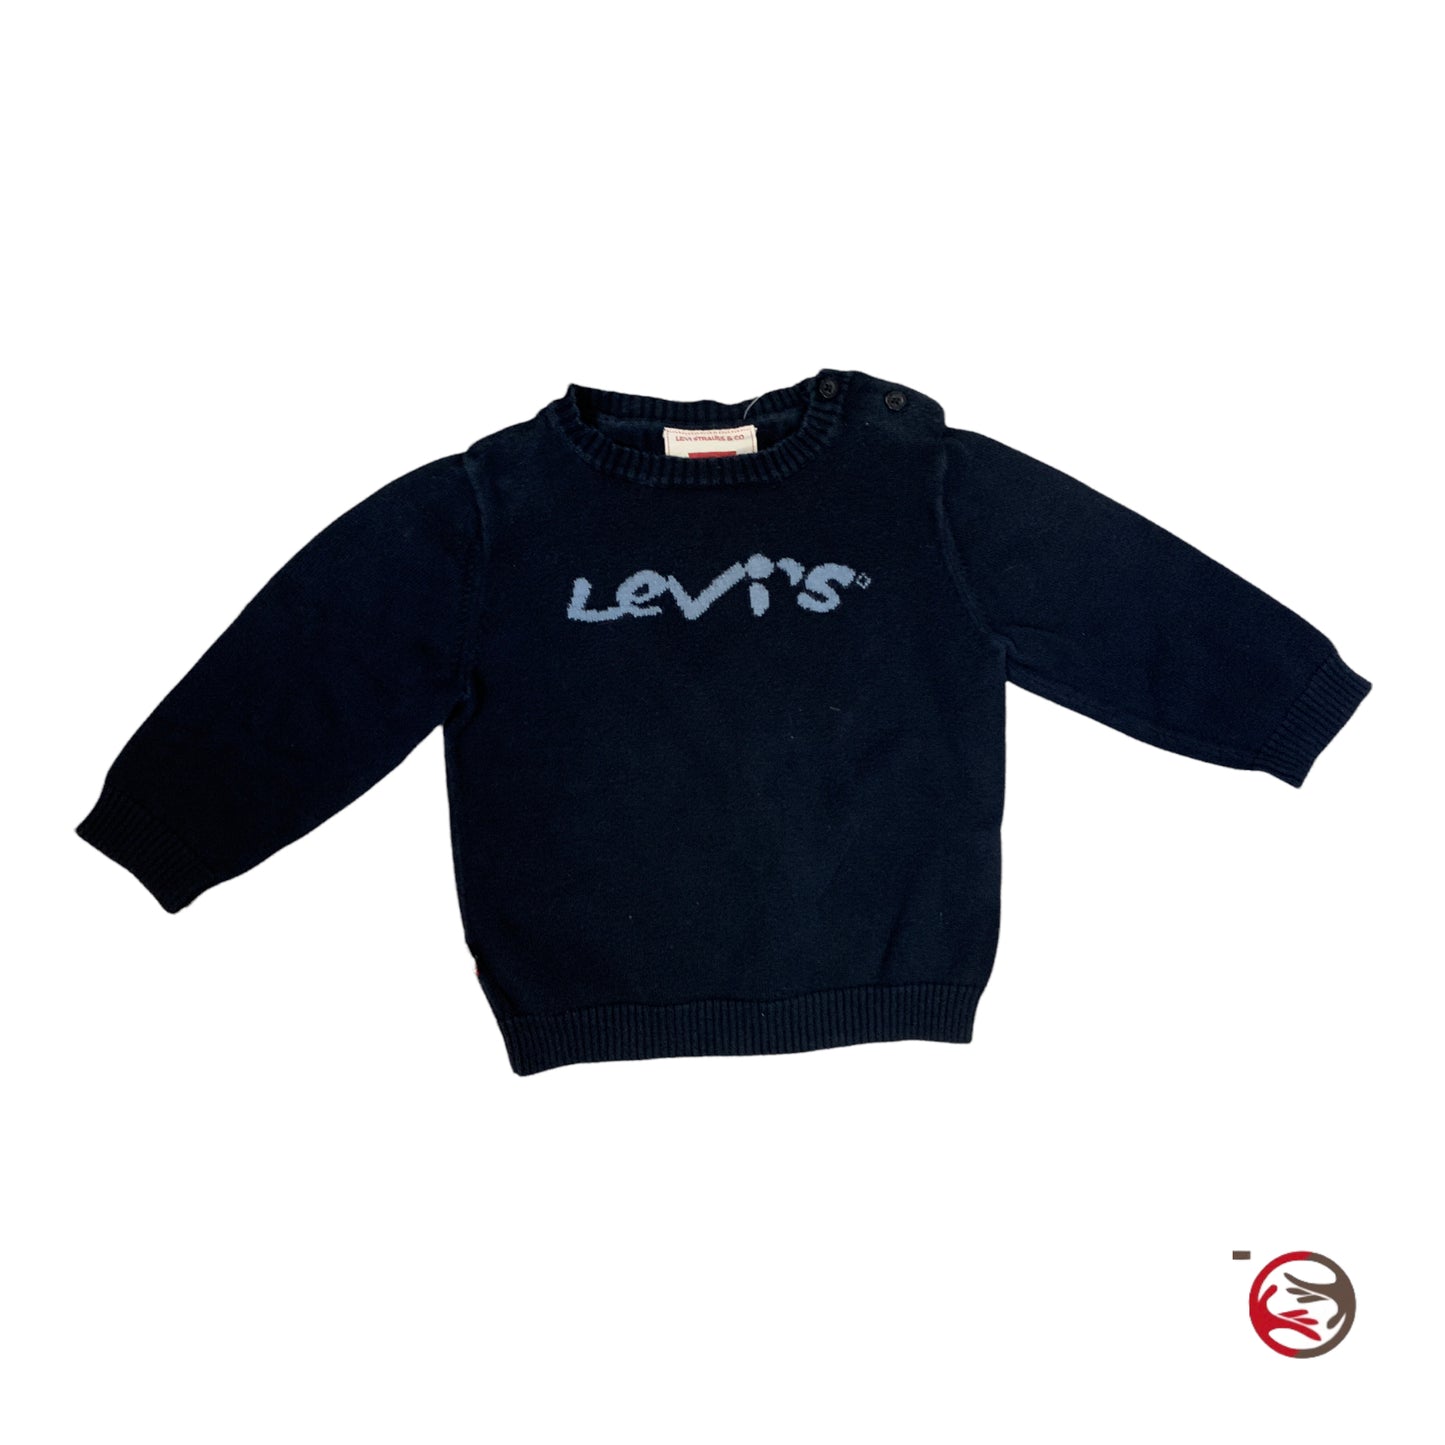 Levi's cotton sweater for boys 18 months